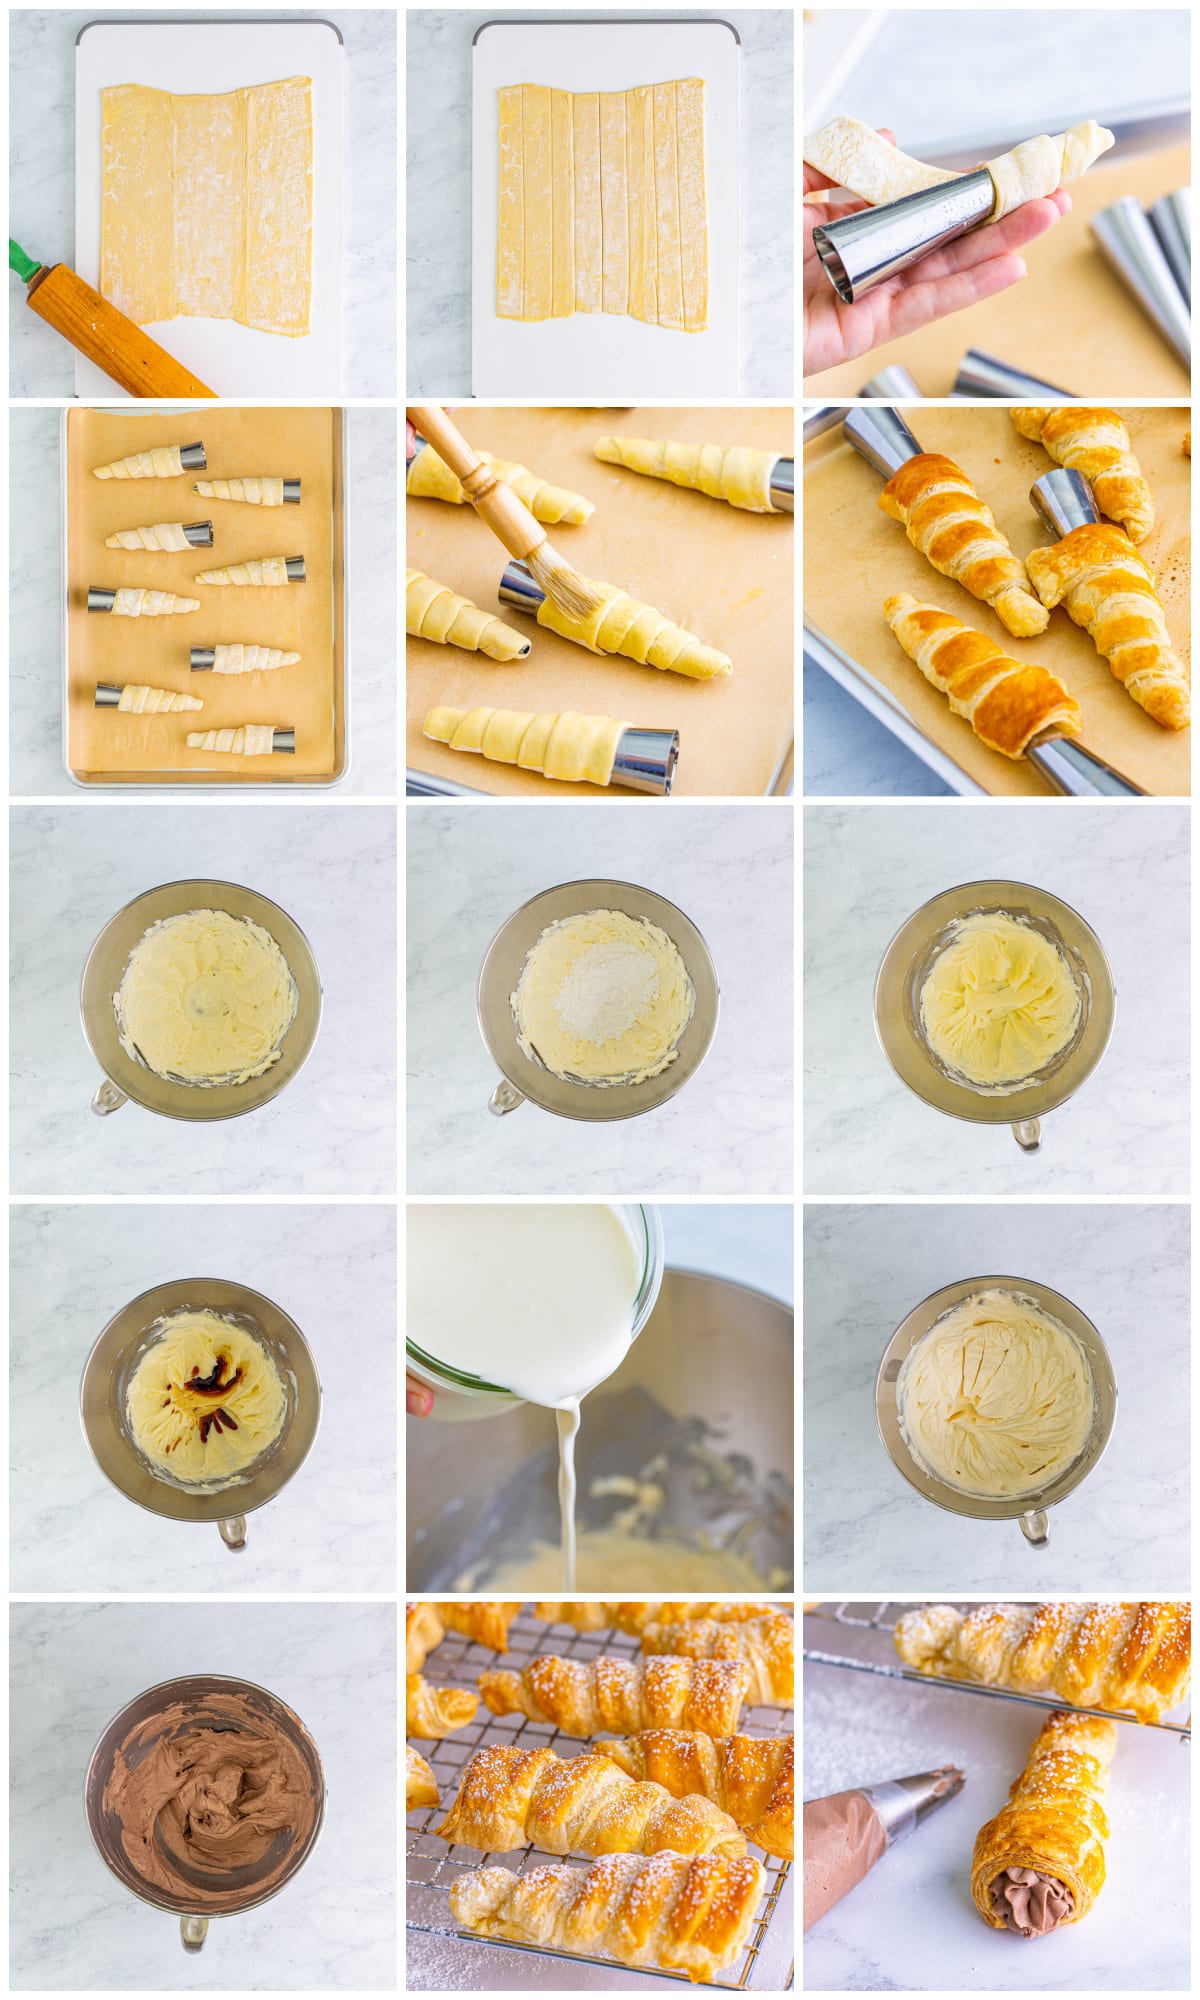 Step by step photos on how to make Cream Horns.